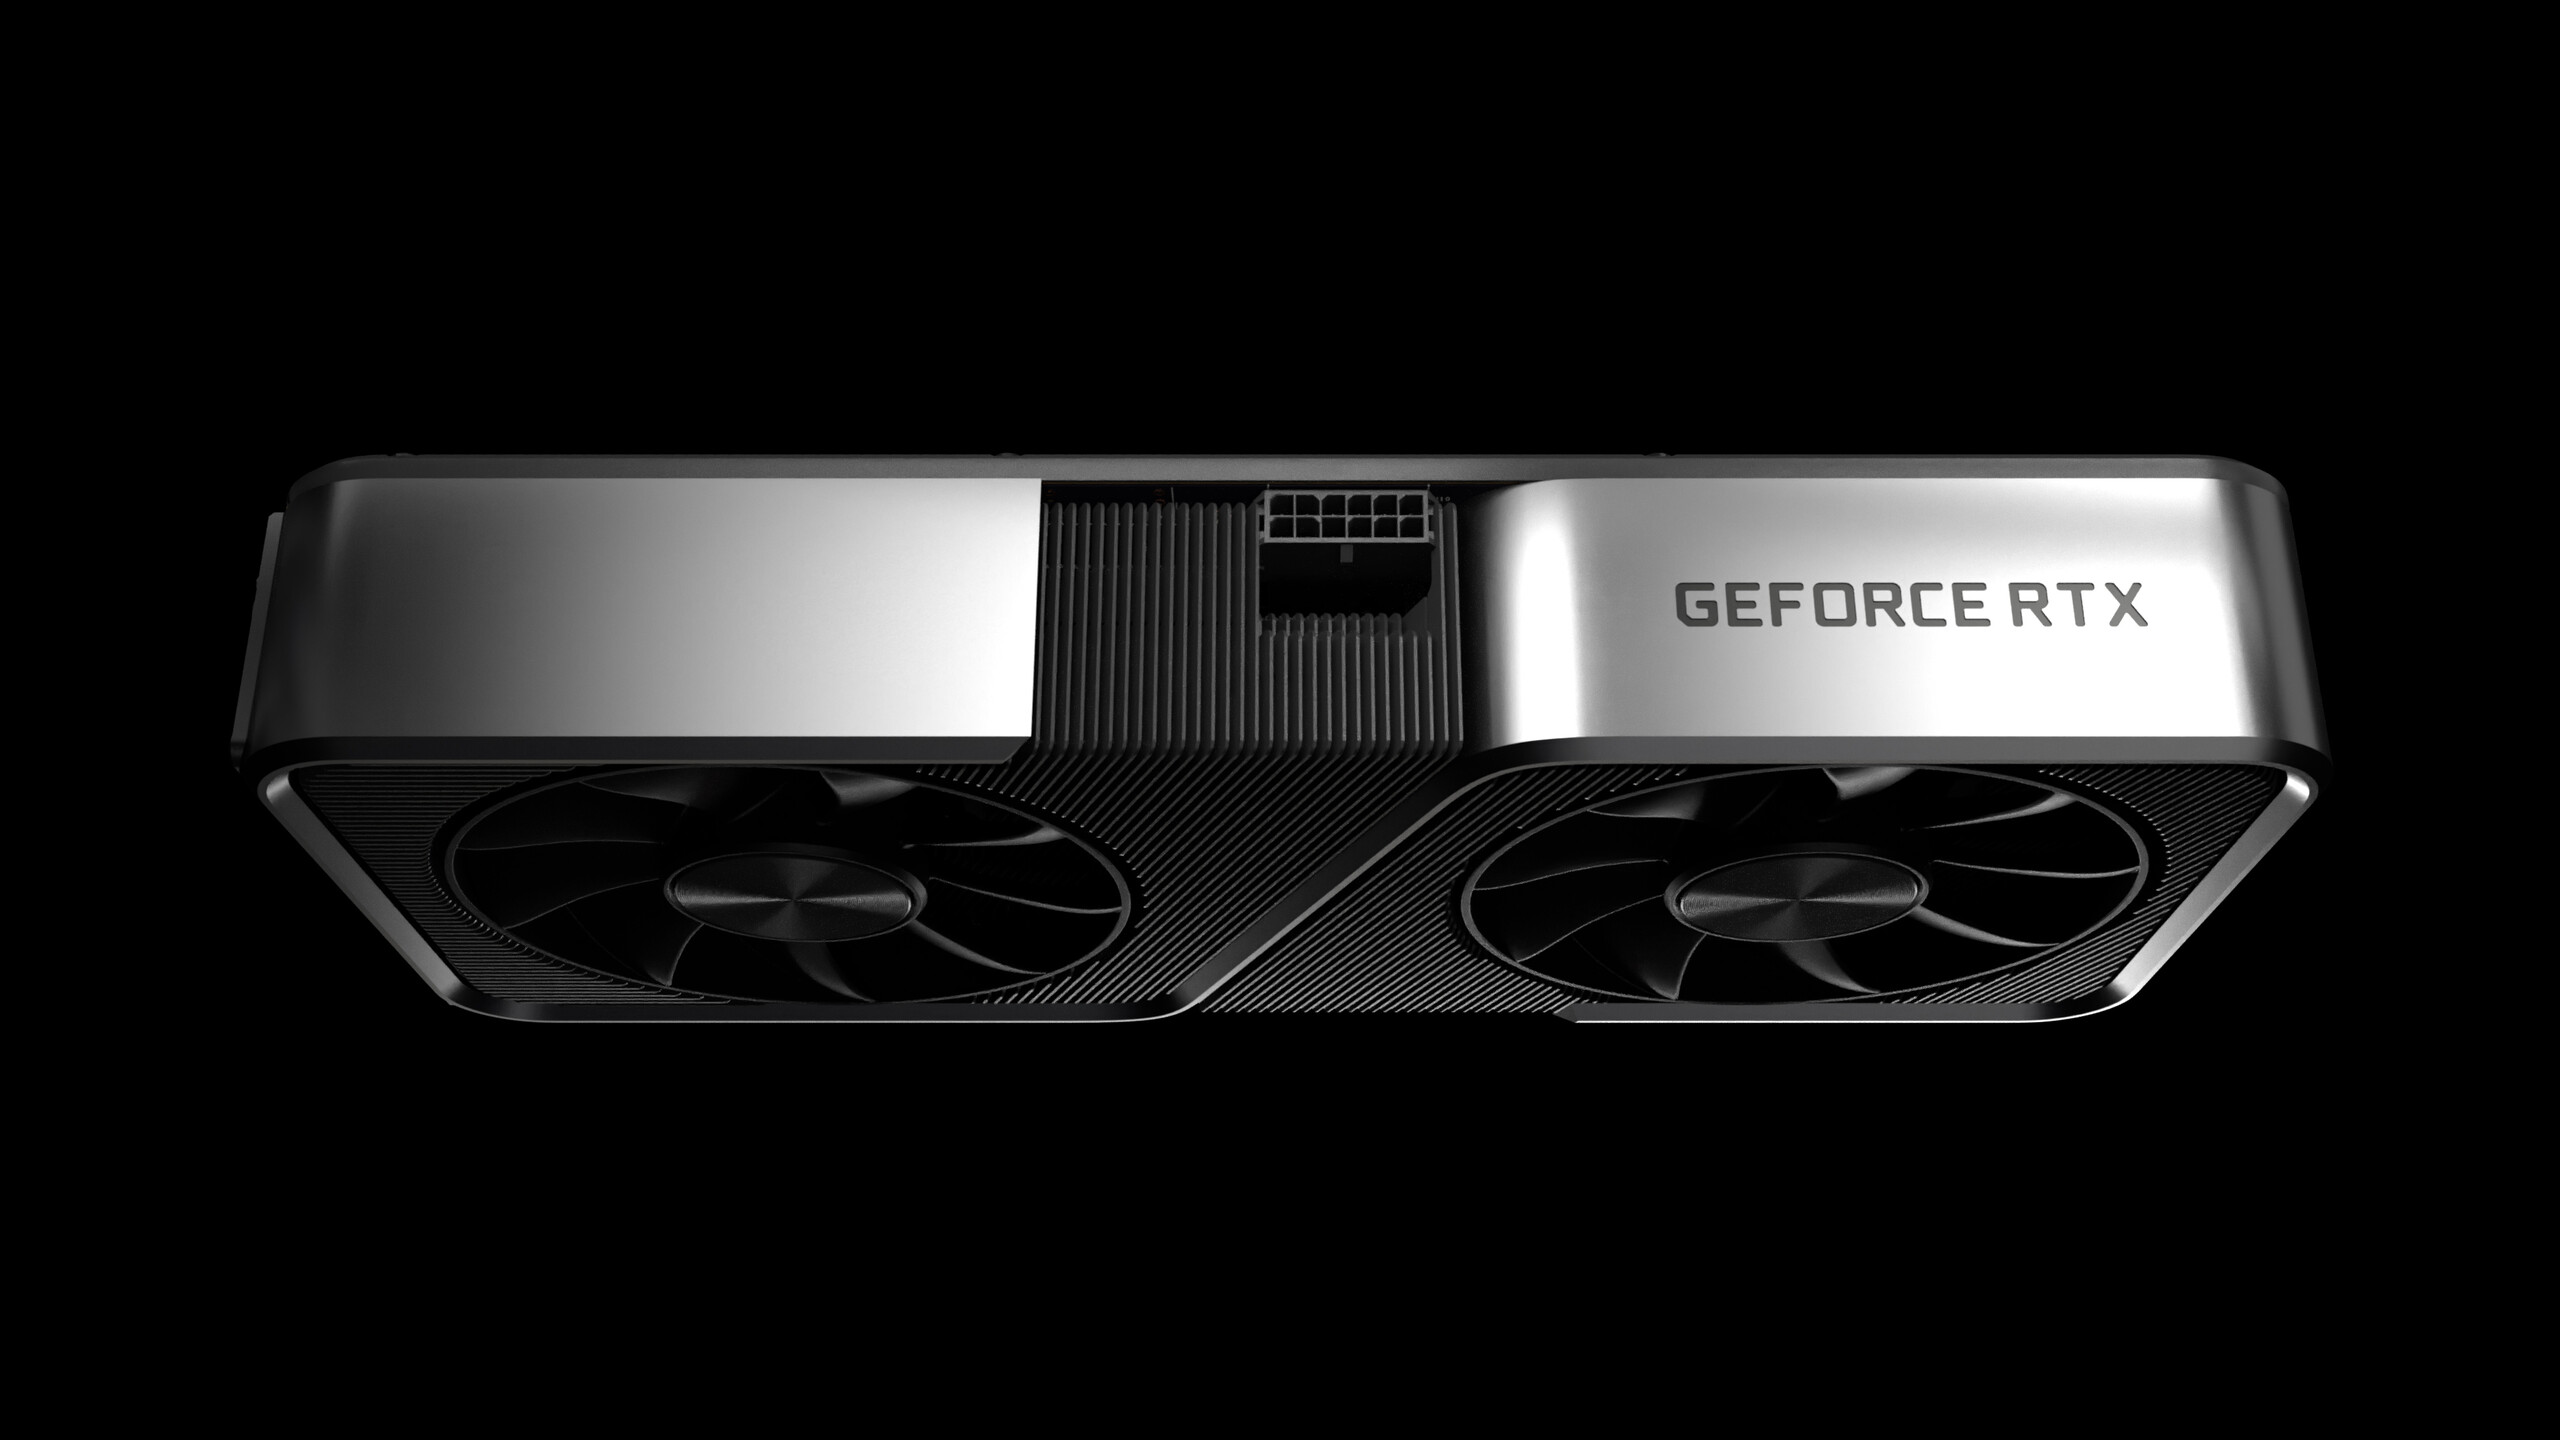 GeForce RTX 4060: Desktop graphics card specifications leak online with 8 VRAM and AD107 GPU - NotebookCheck.net News